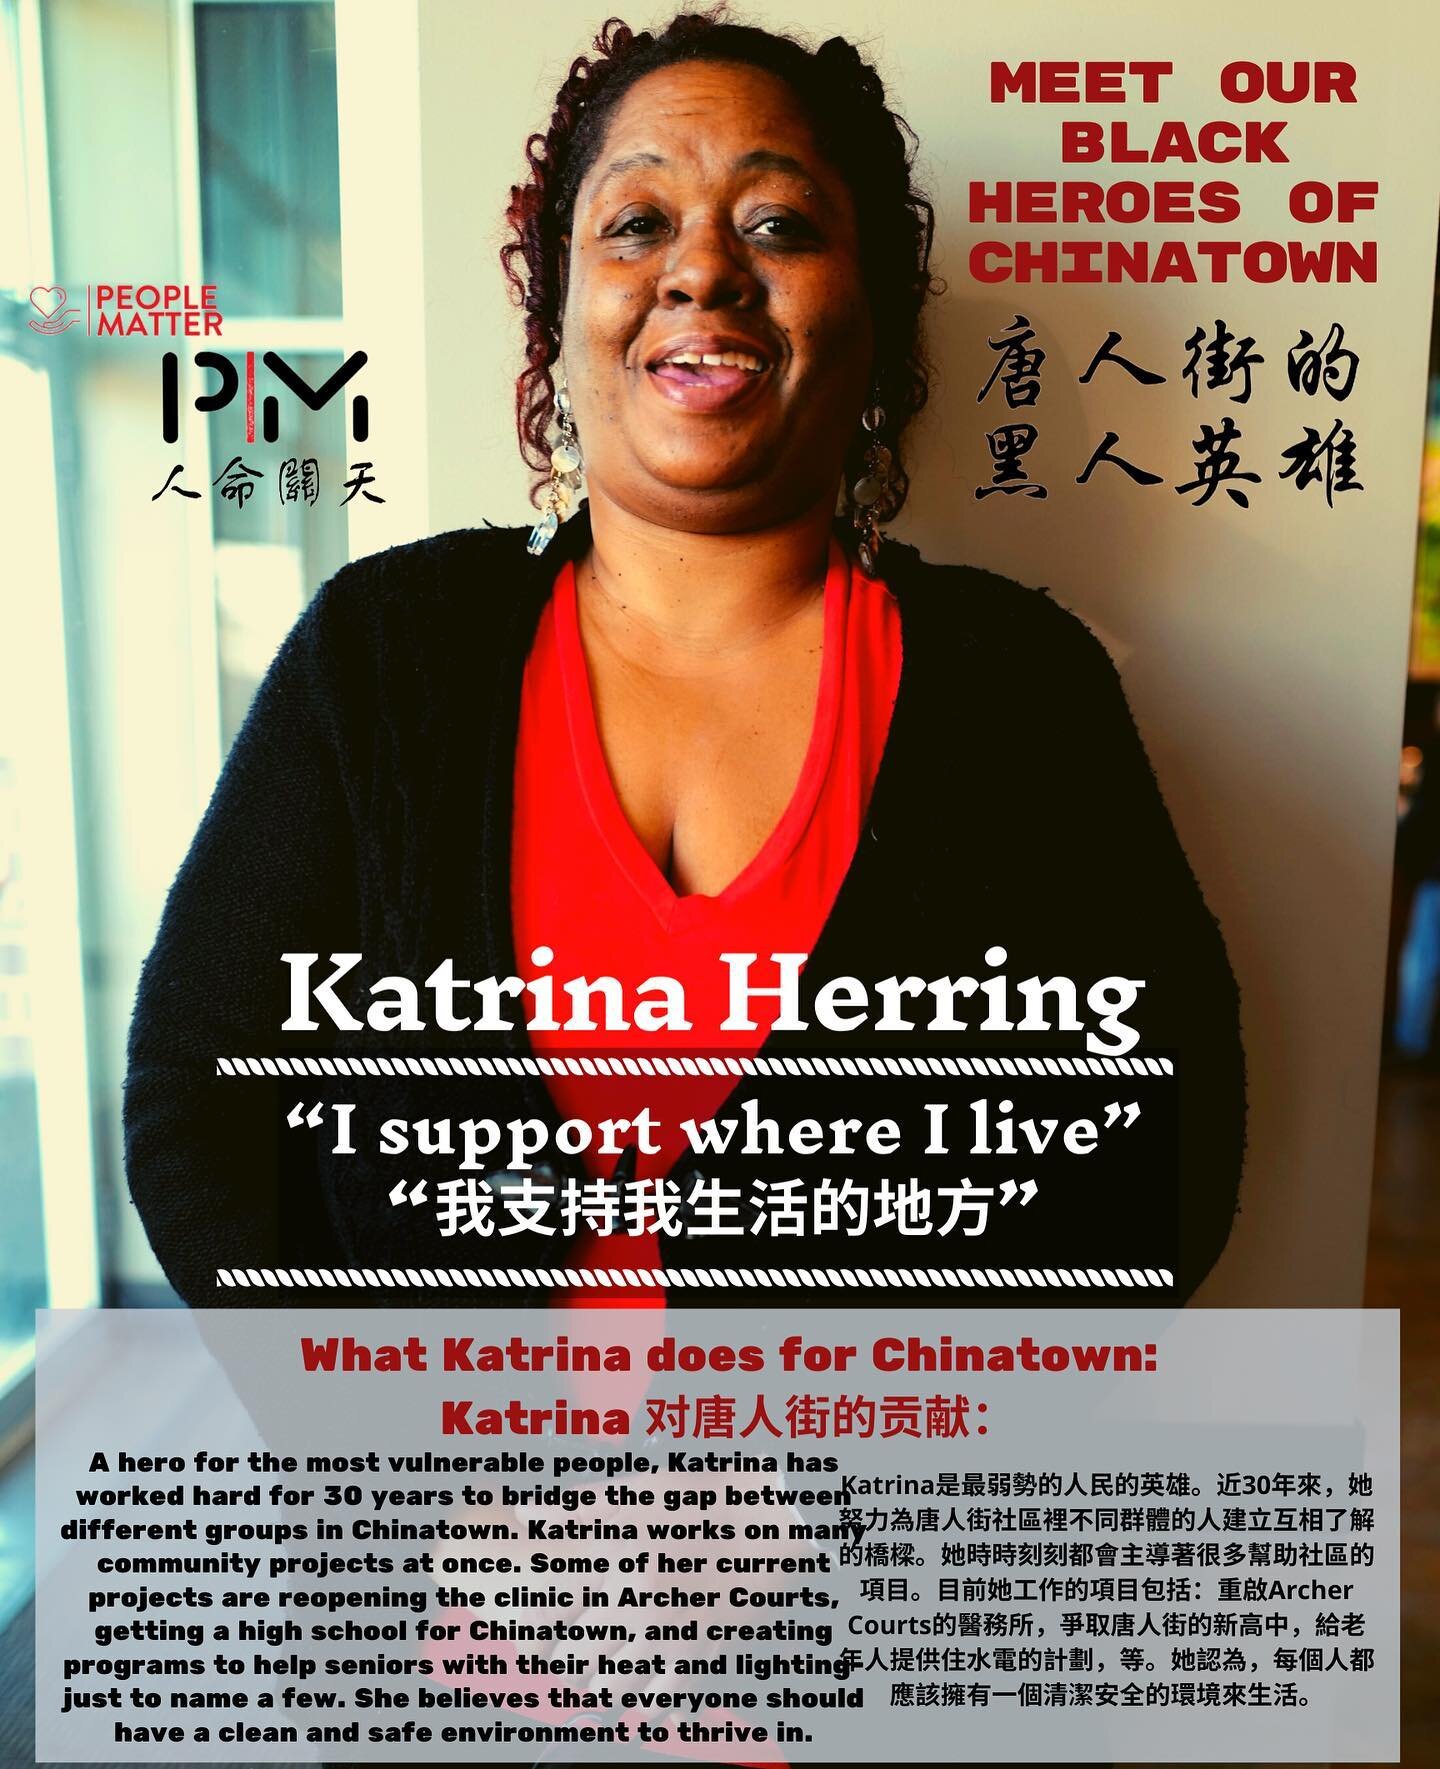 Nominate a Black hero! Tomorrow is the last day to nominate a black hero for Chinatown at https://tinyurl.com/nominateablackhero

We are coming back with our annual Celebration of Black Heroes of Chinatown in 2021! Every week until the deadline for n